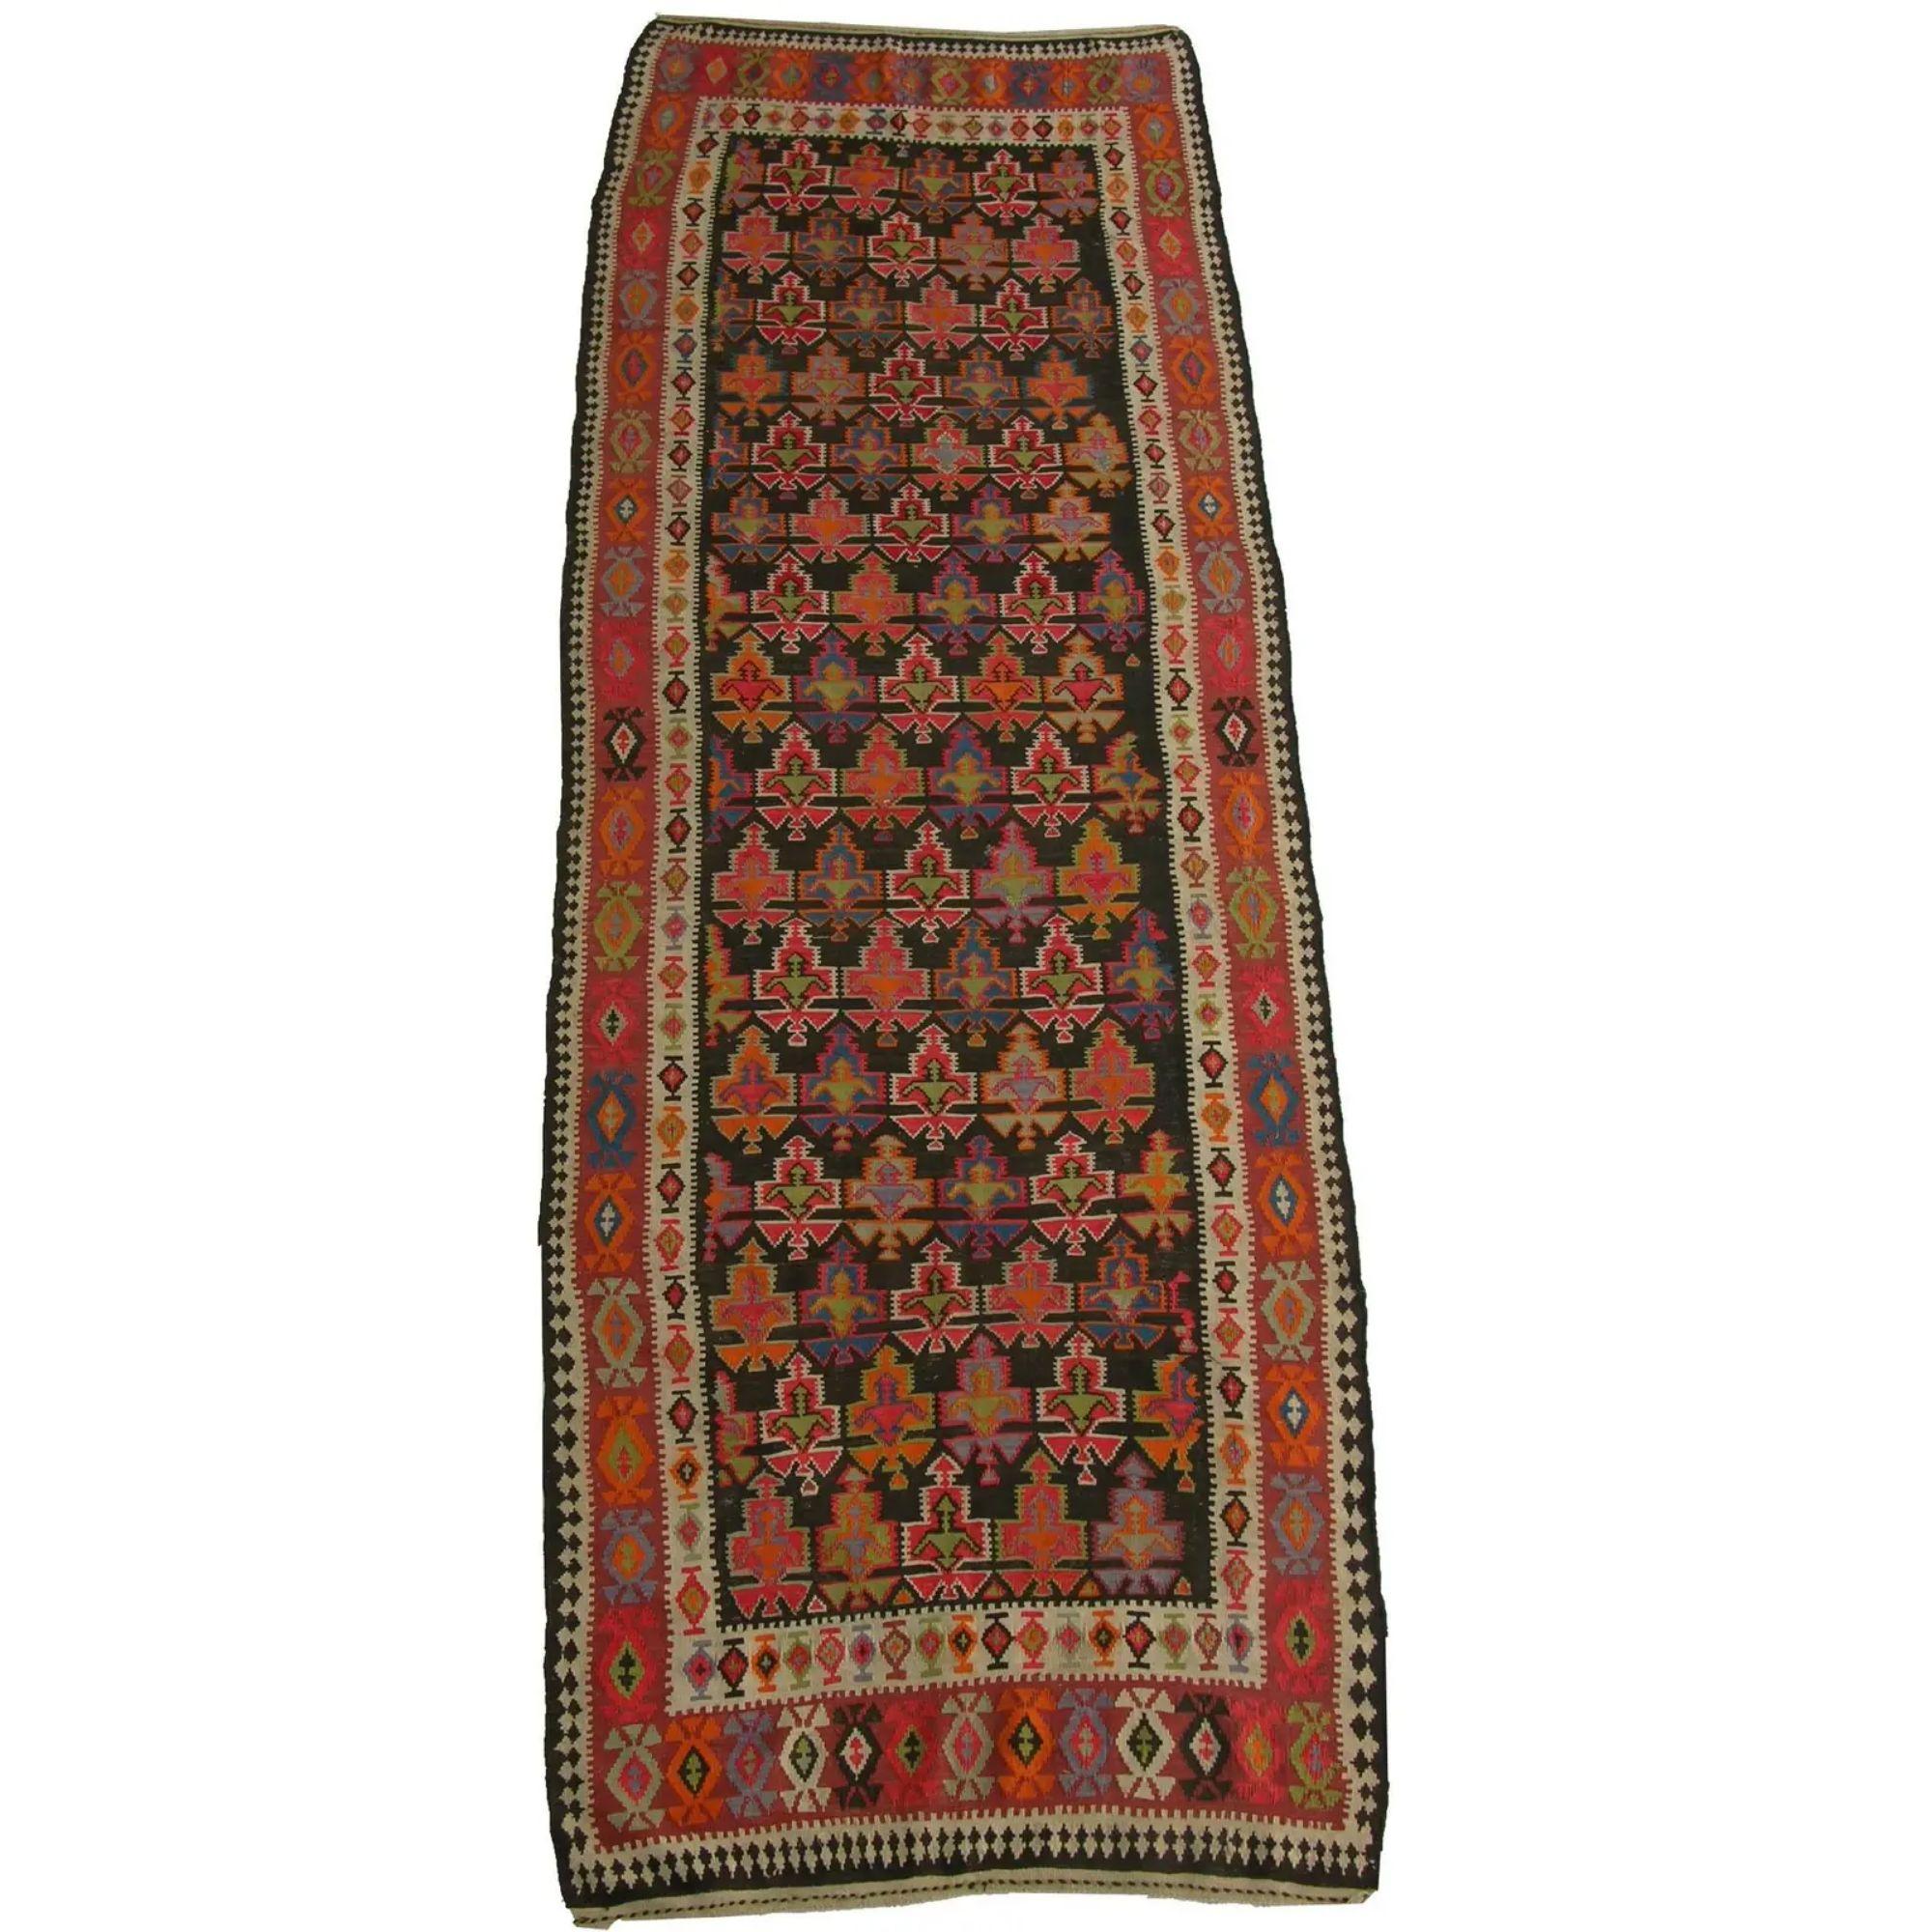 Early 20th Century Antique Kilim Geometric Runner Rug - 14'4'' X 4'10'' For Sale